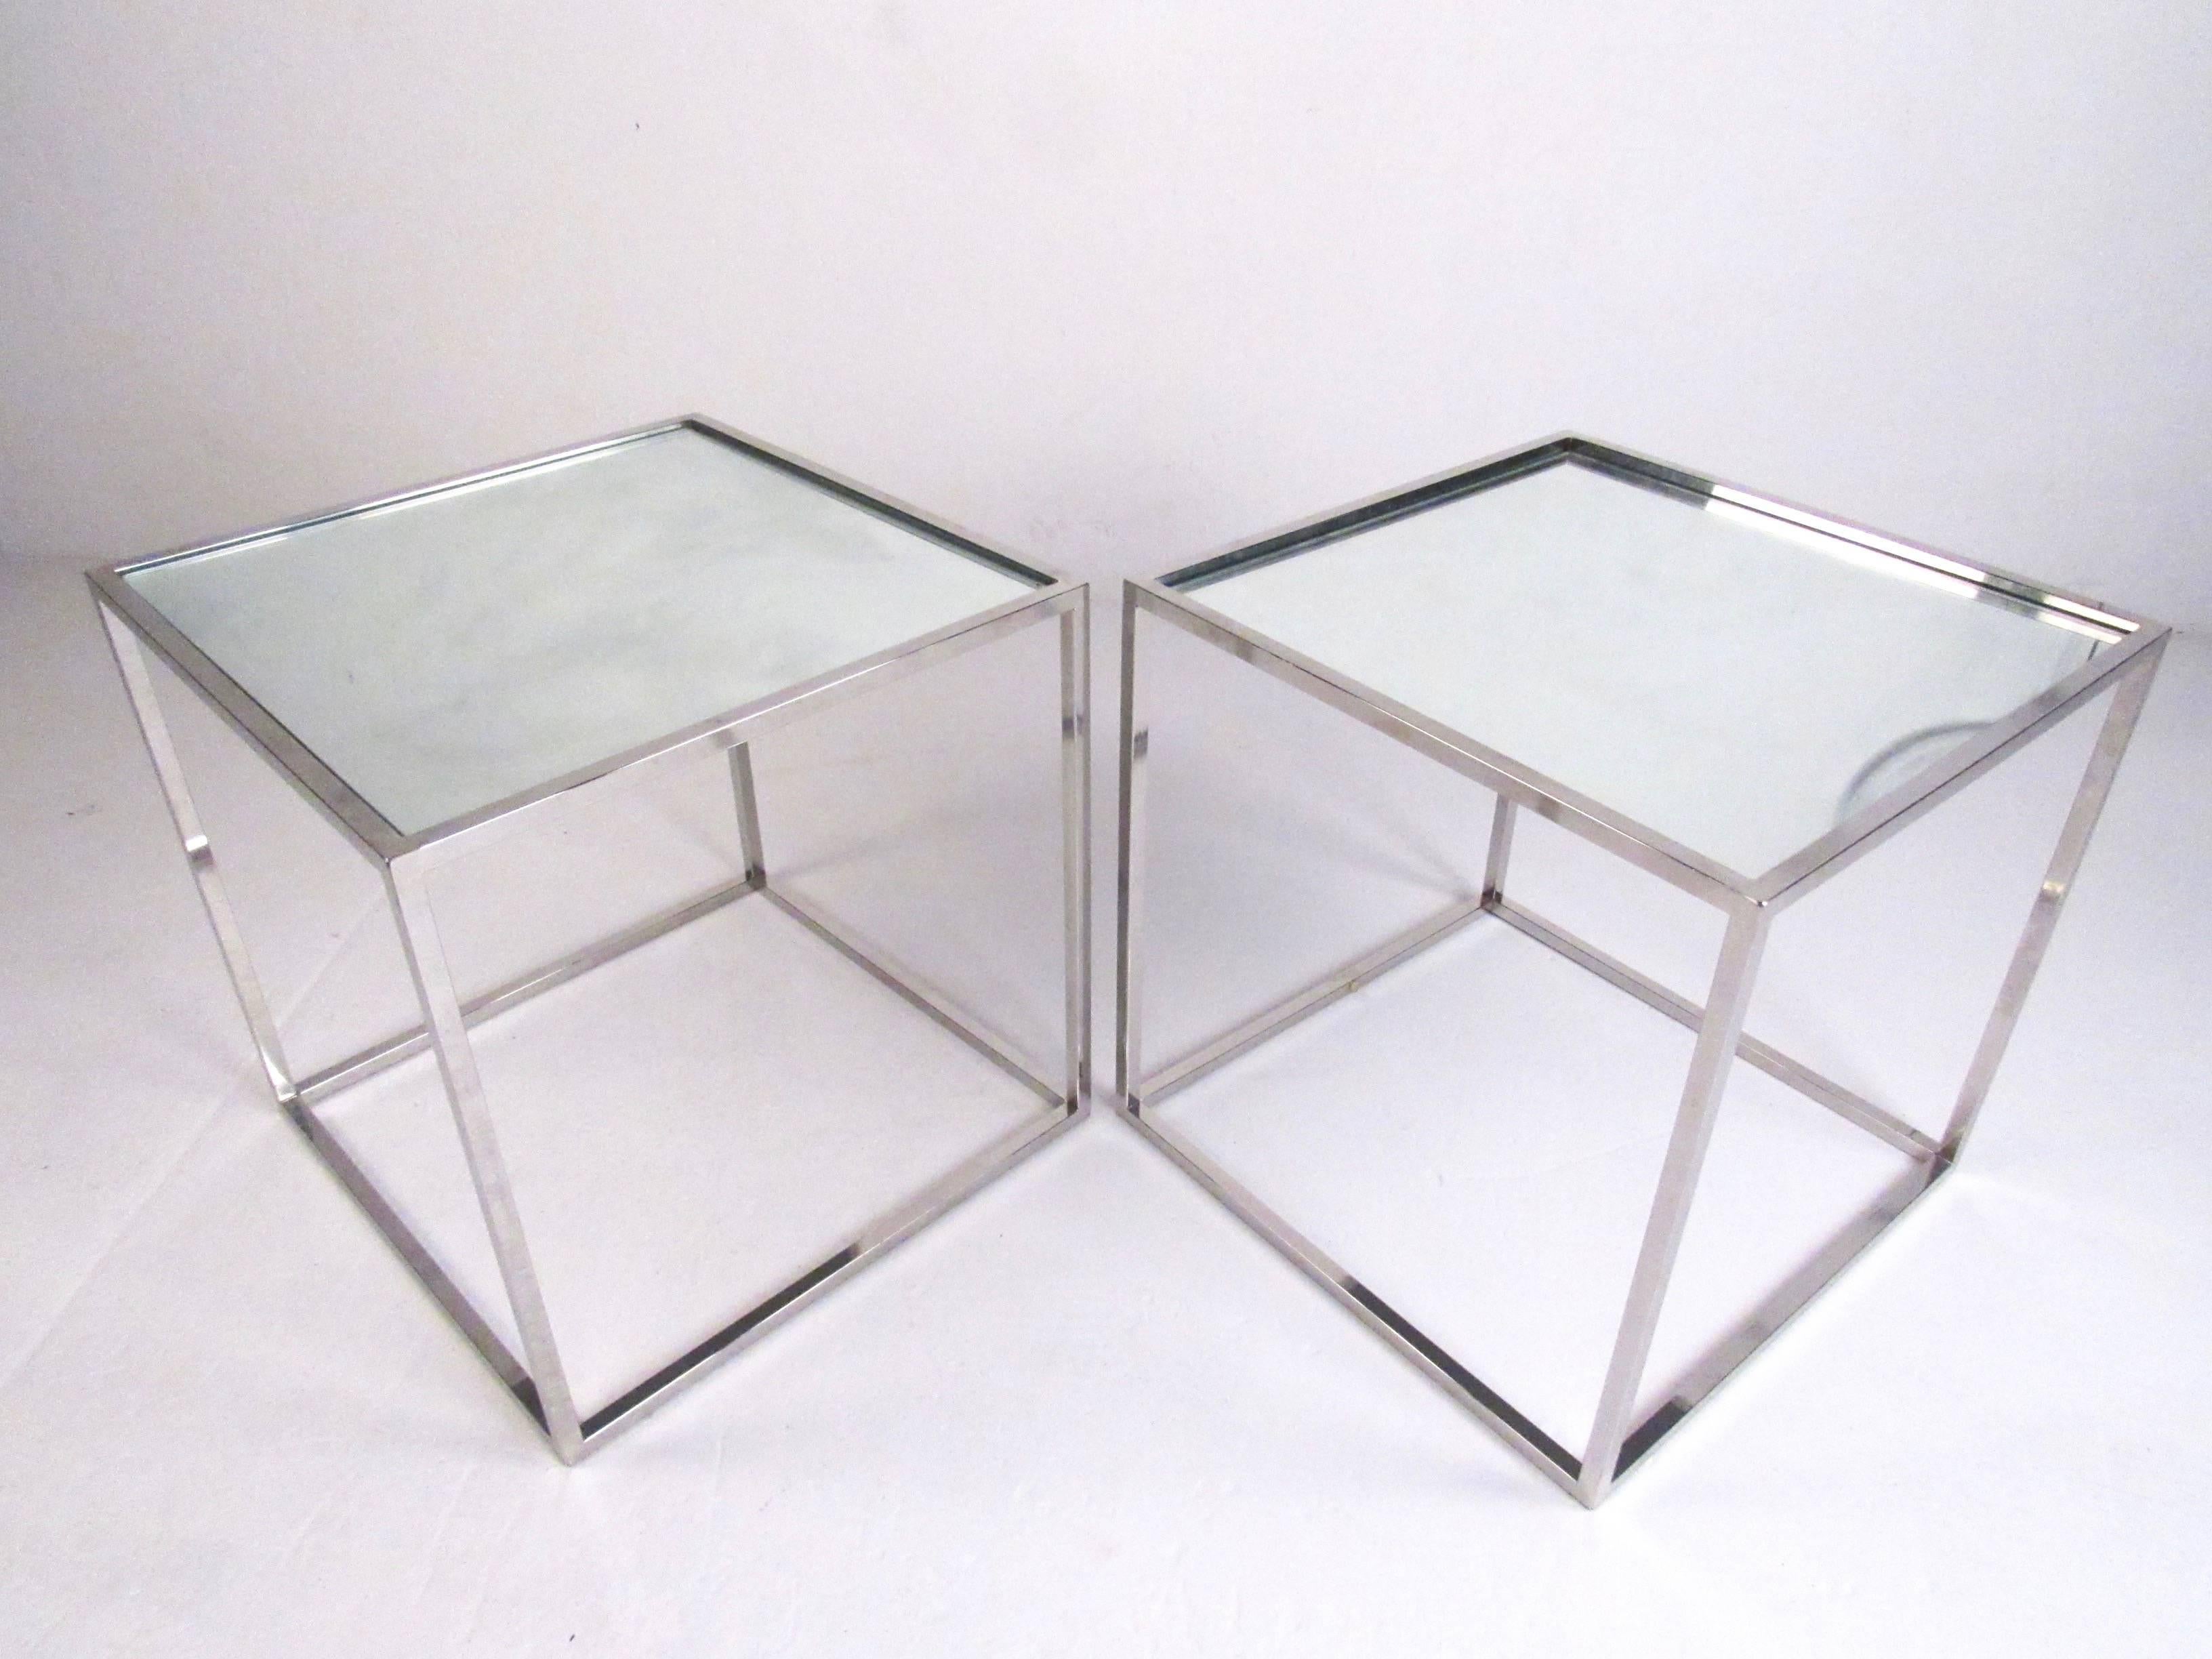 This stylish pair of cubist end tables feature stylish vintage chrome construction with a mirrored glass tabletop. The elegant simplicity of this mid-century pair of tables make them the perfect modern addition to any interior. Please confirm item